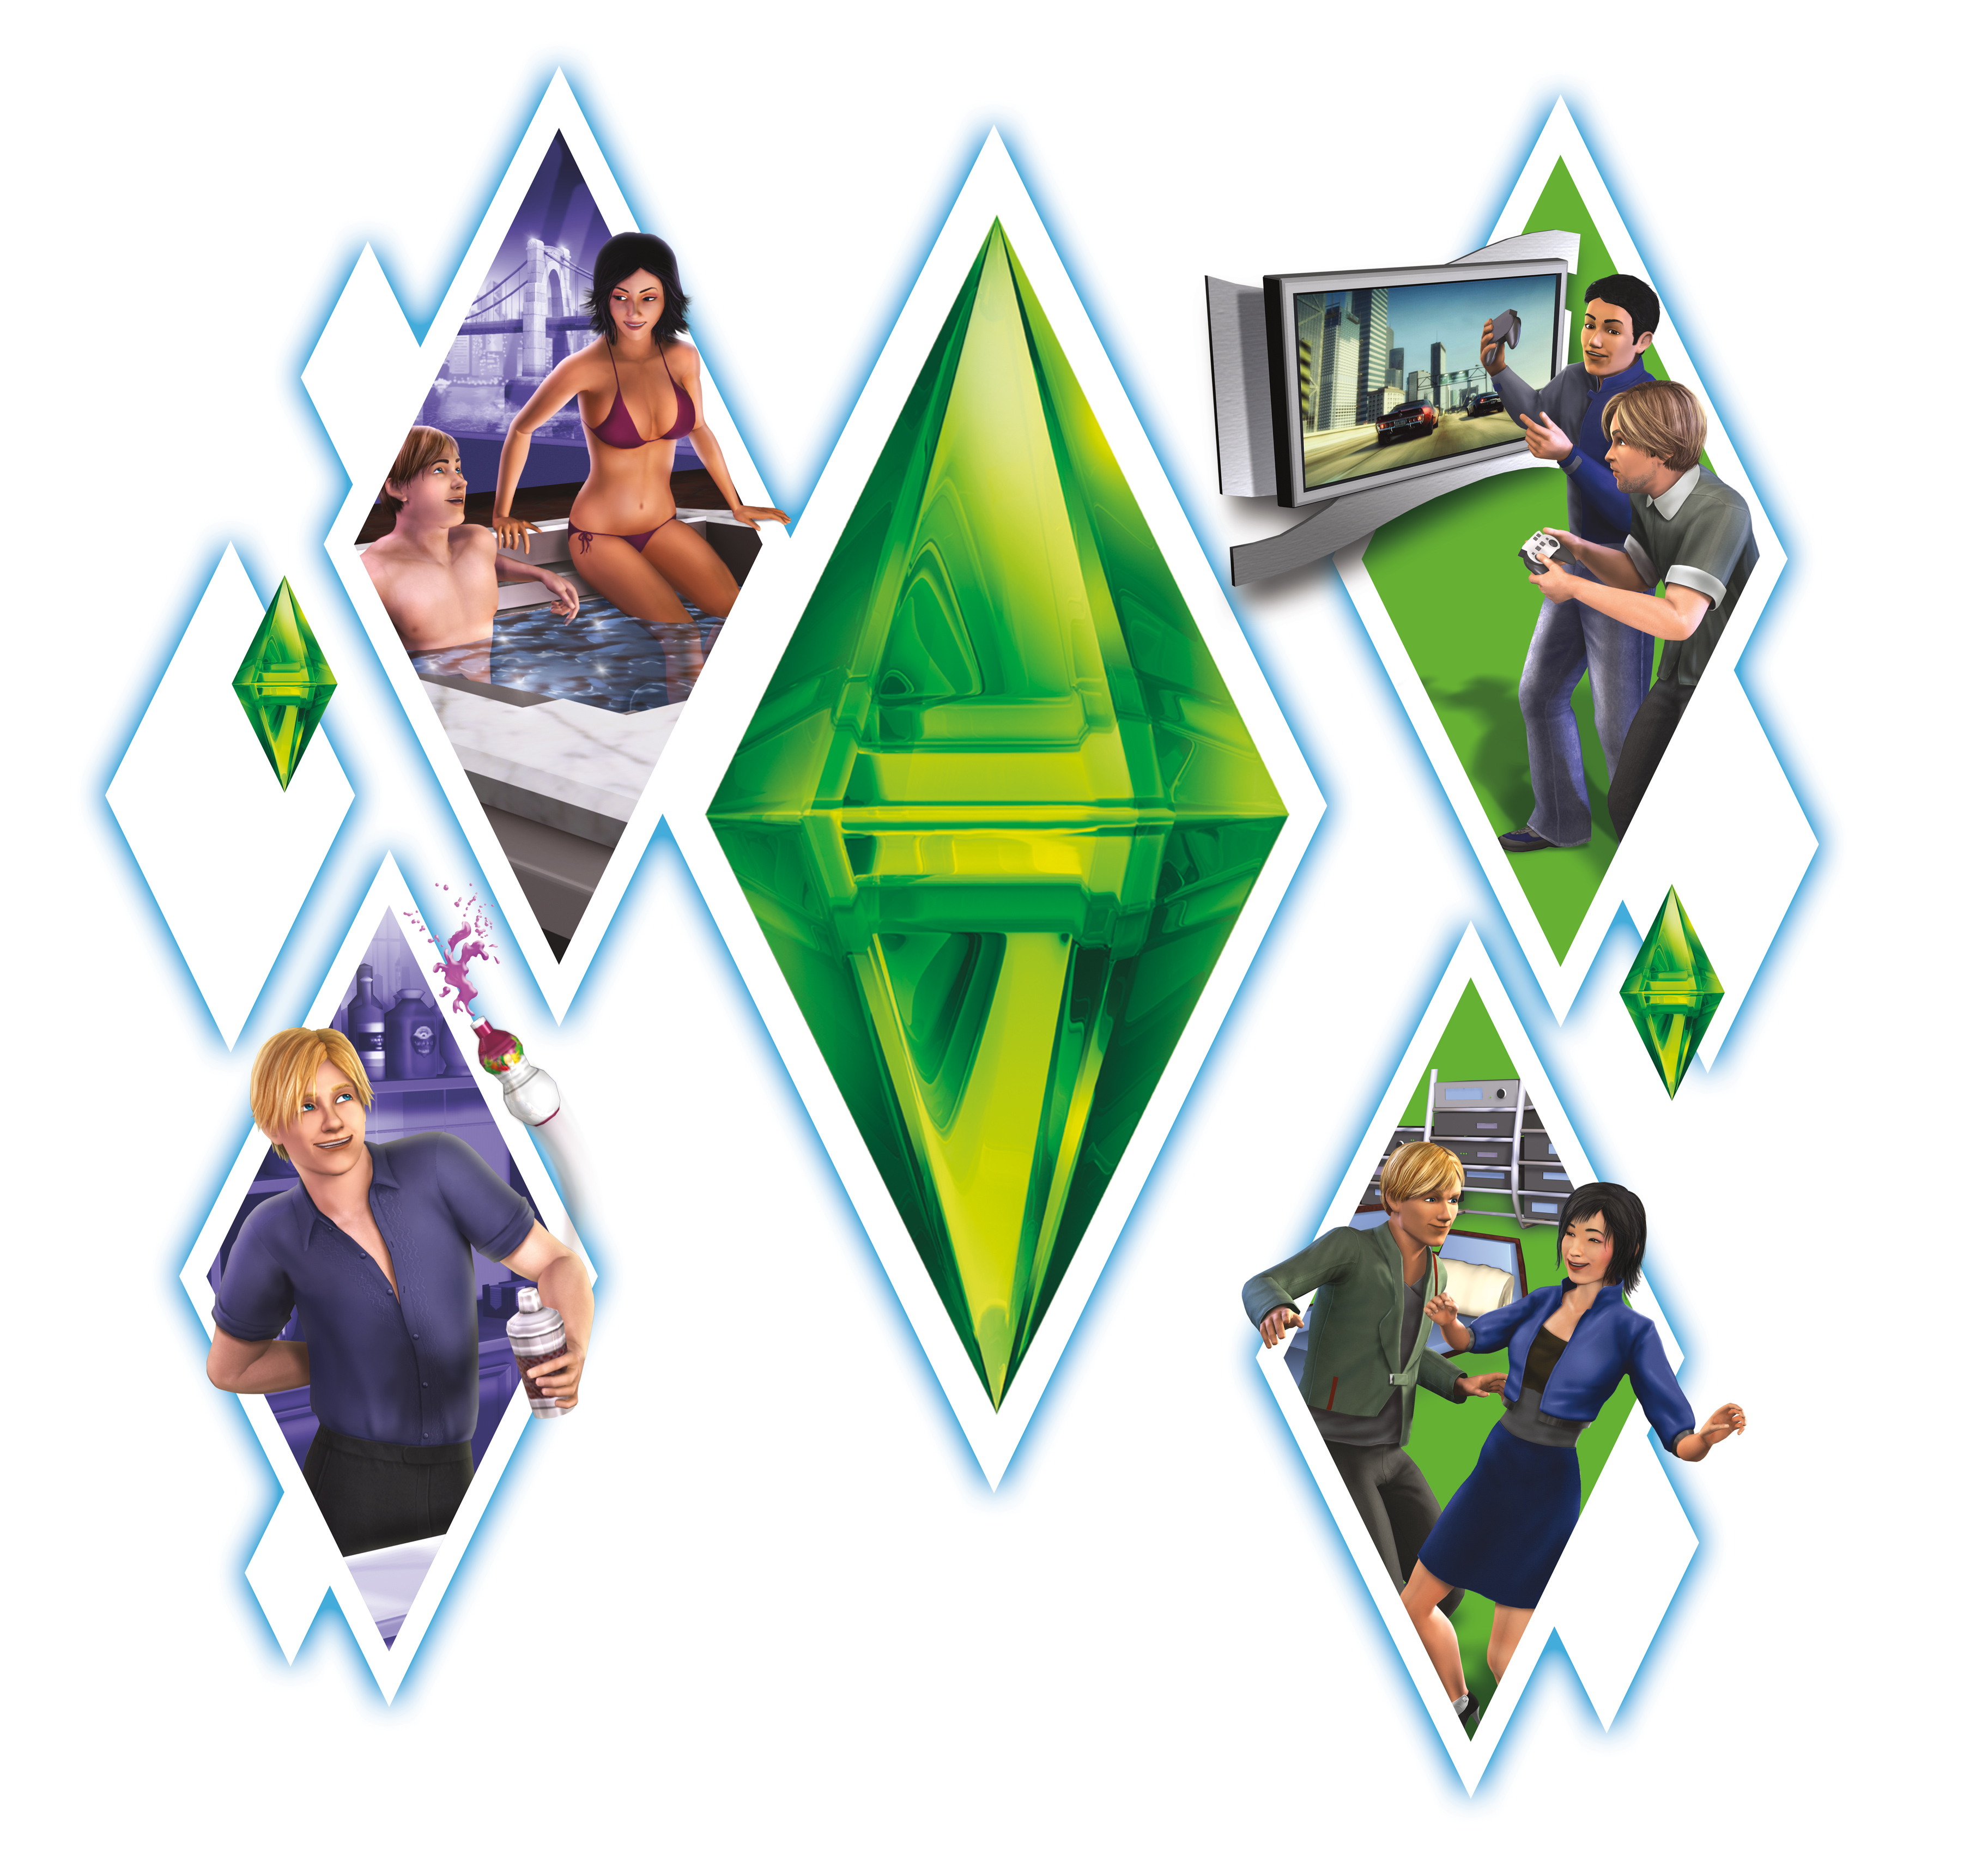 the sims 3 starter pack pc download